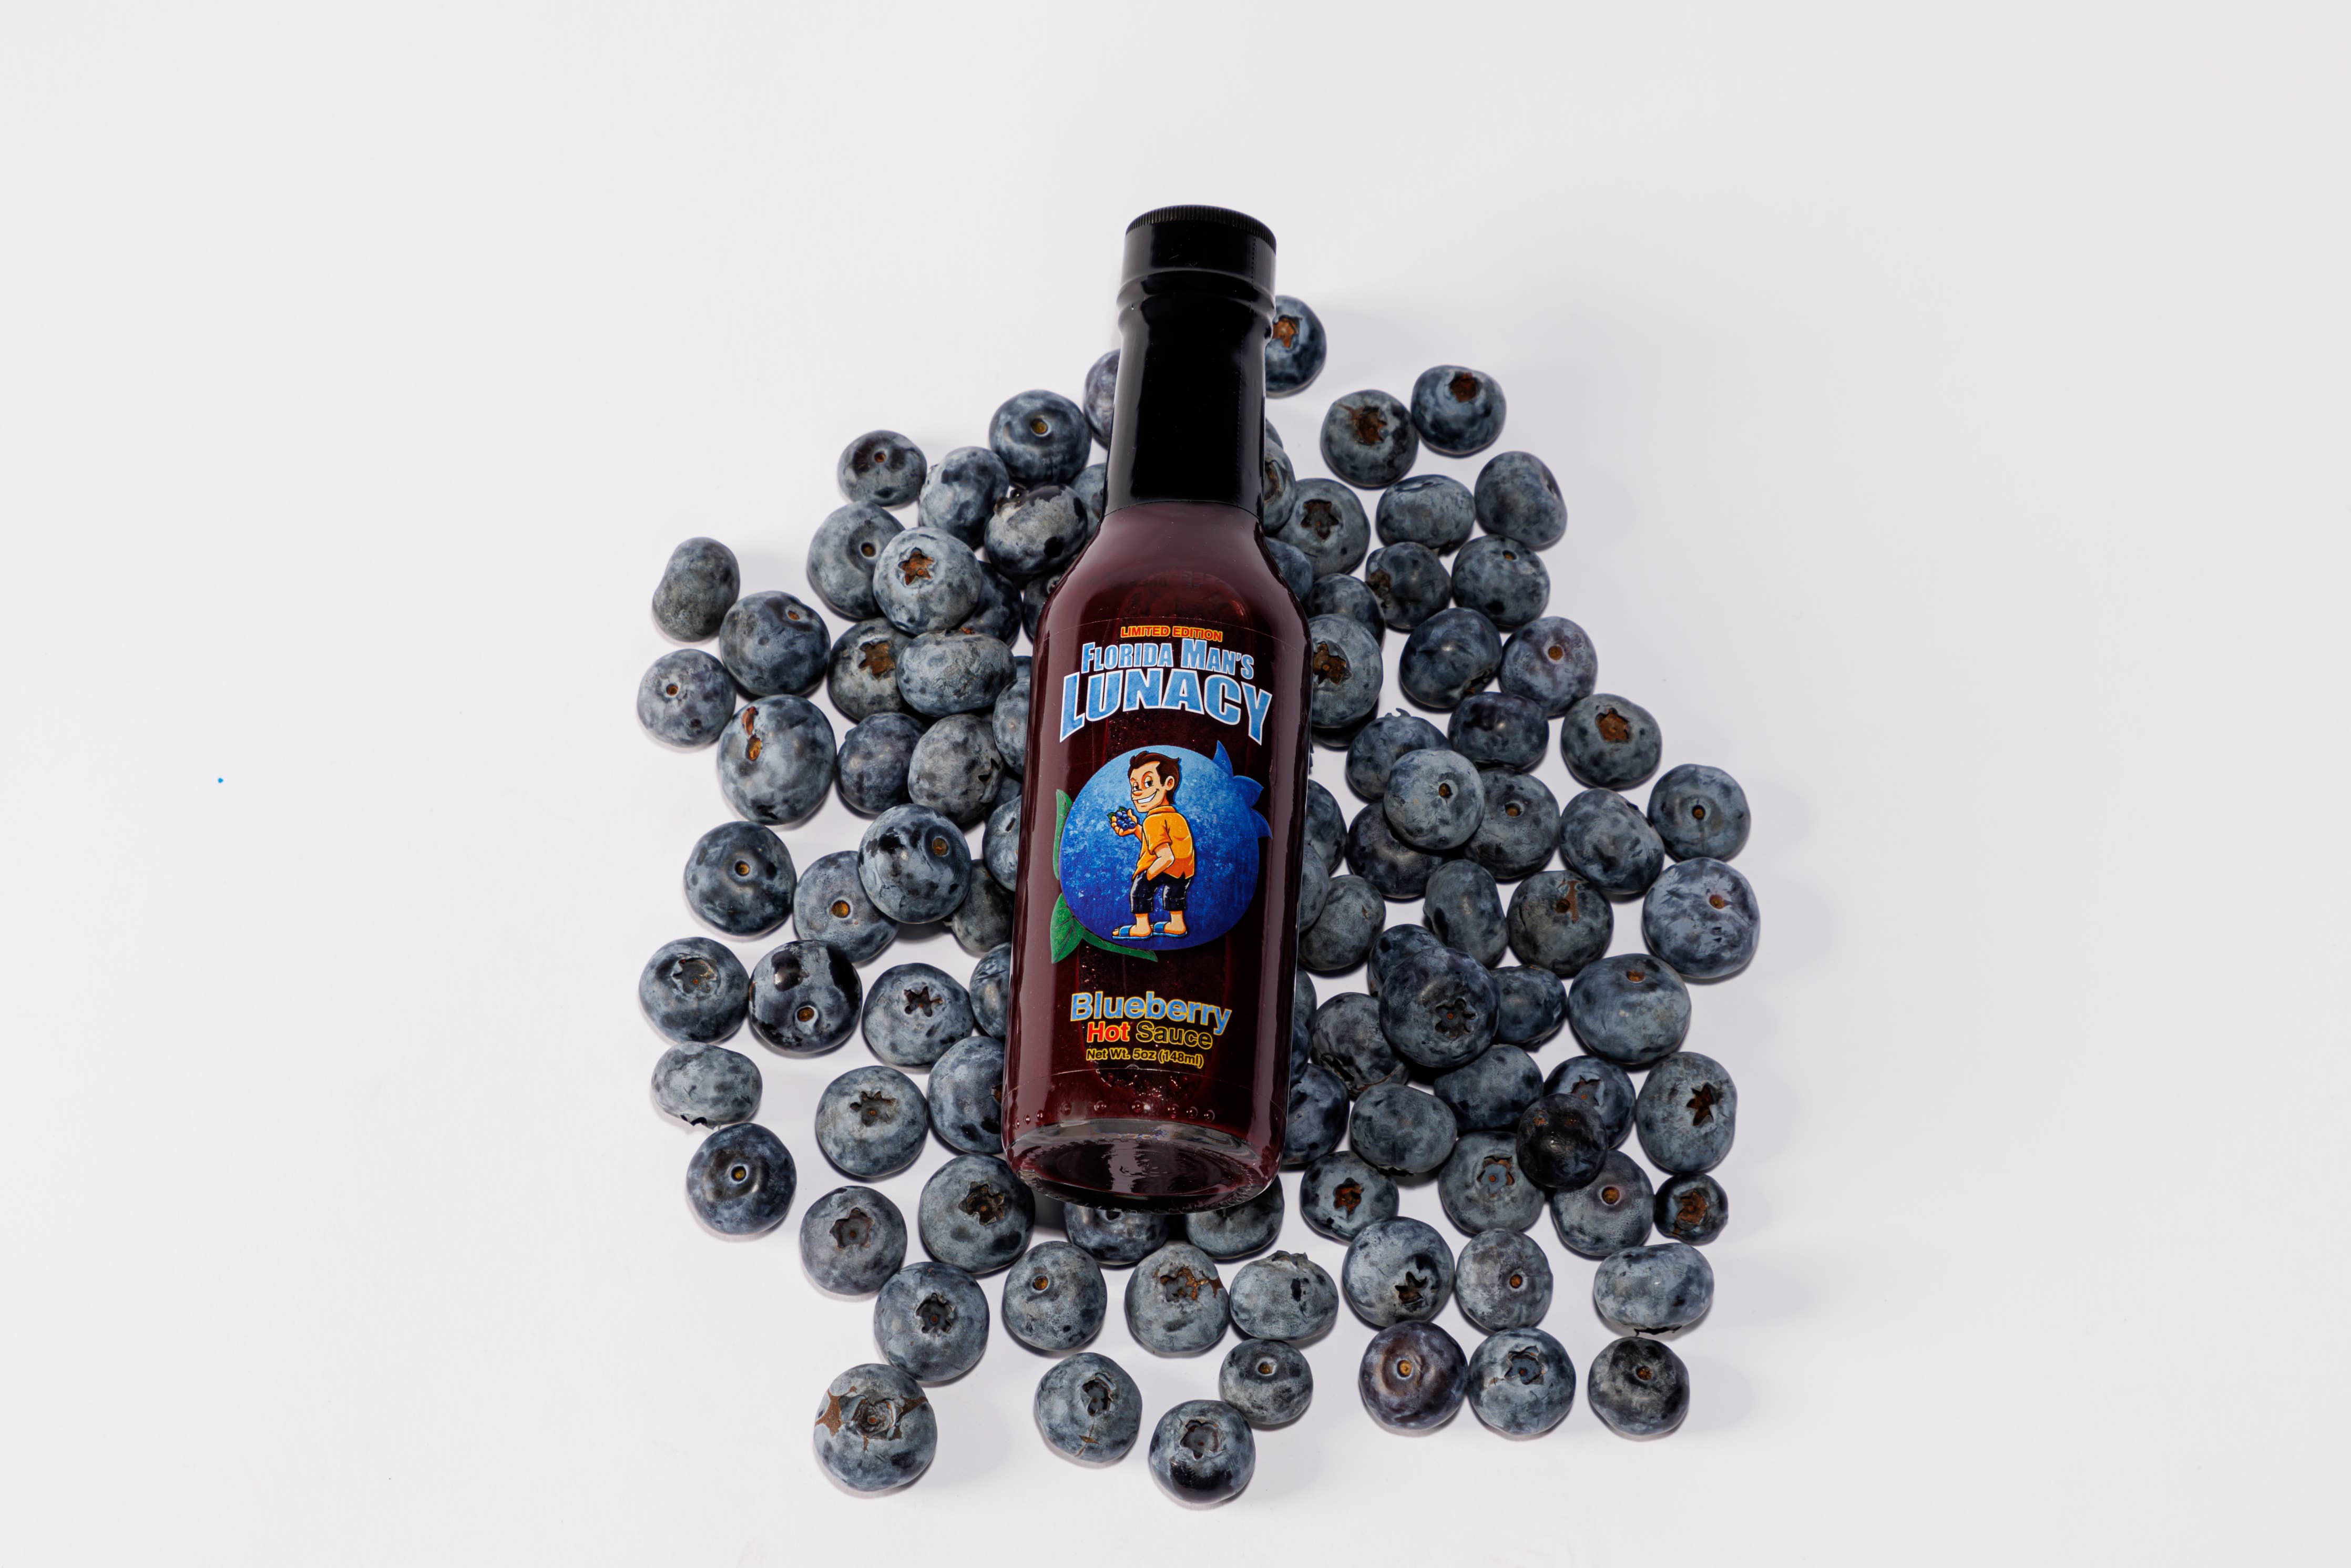 Florida Man's Lunacy Blueberry Hot Sauce- LIMITED EDITION